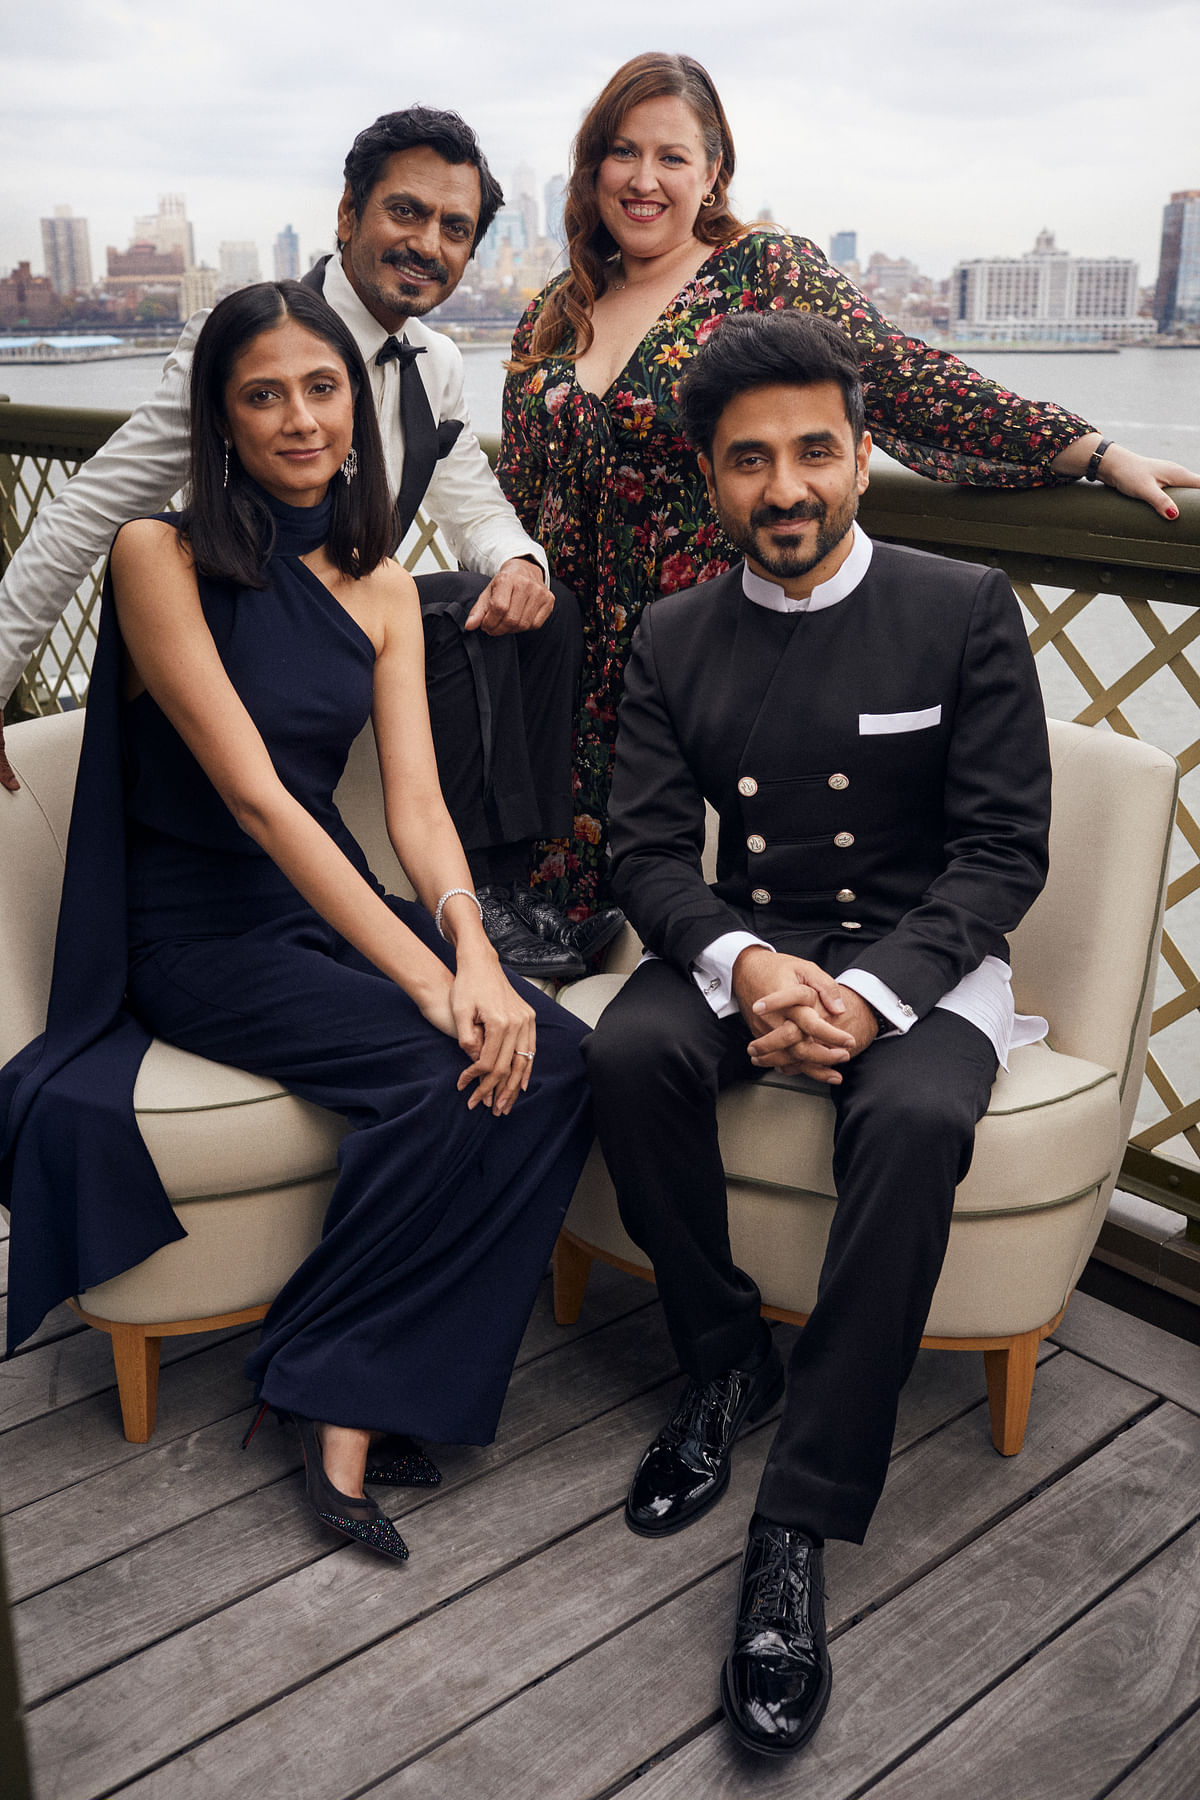 Vir Das' comedy special lost to Call My Agent! at the International Emmys 2021.